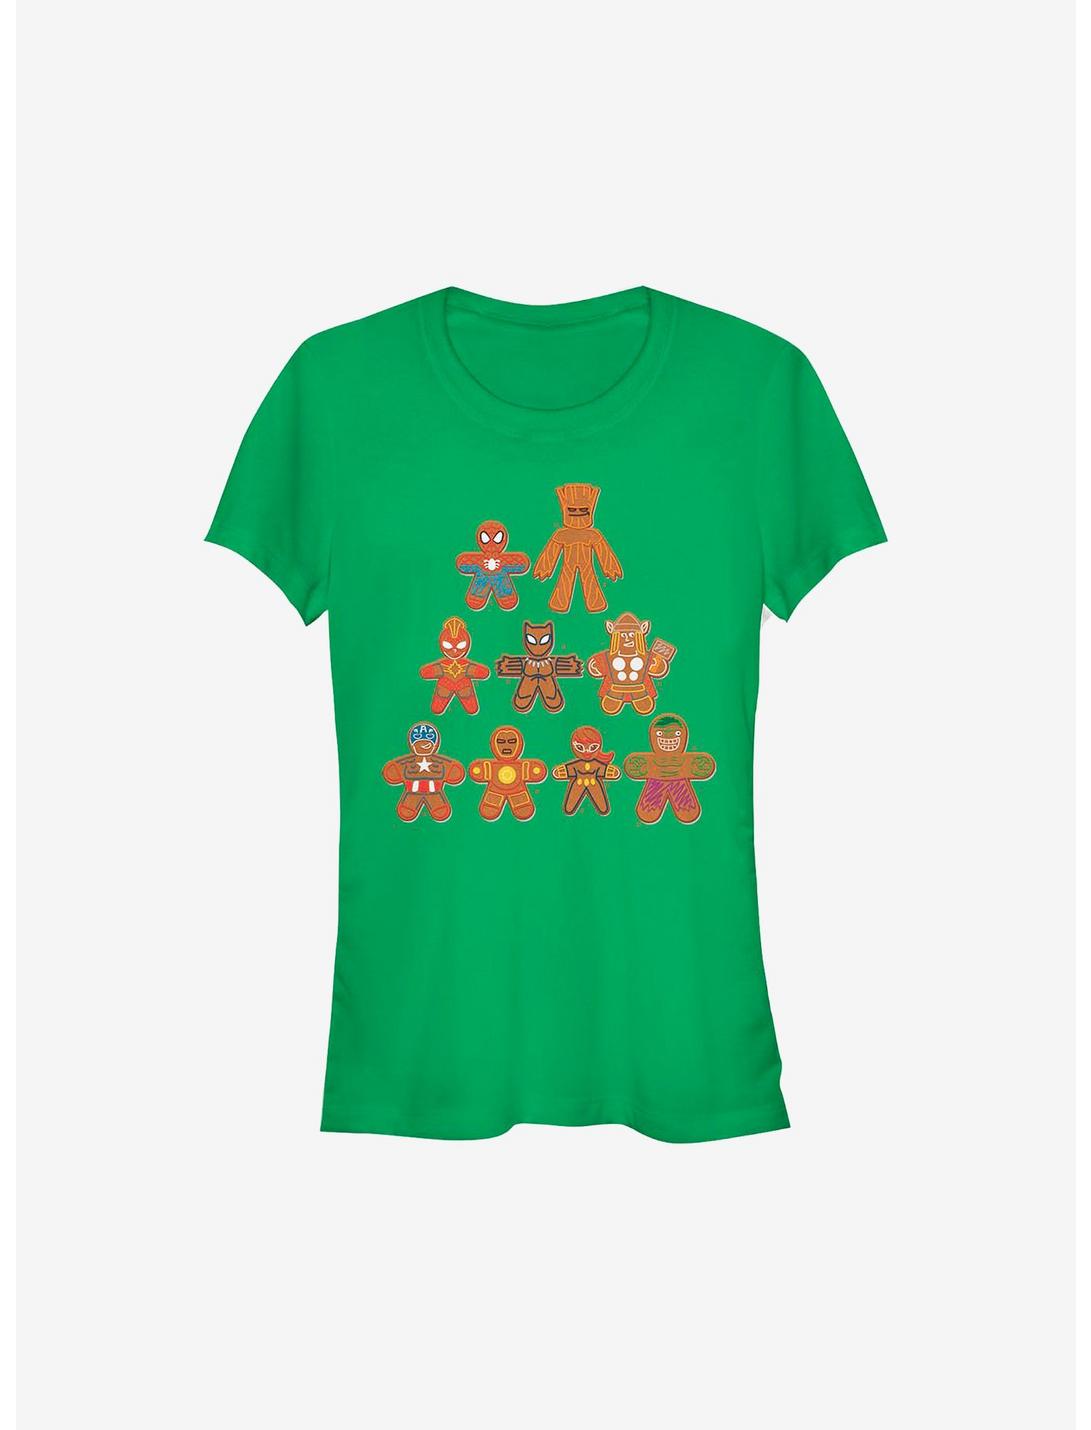 Marvel Avengers Cookie Tree Holiday Girls T-Shirt, KELLY, hi-res